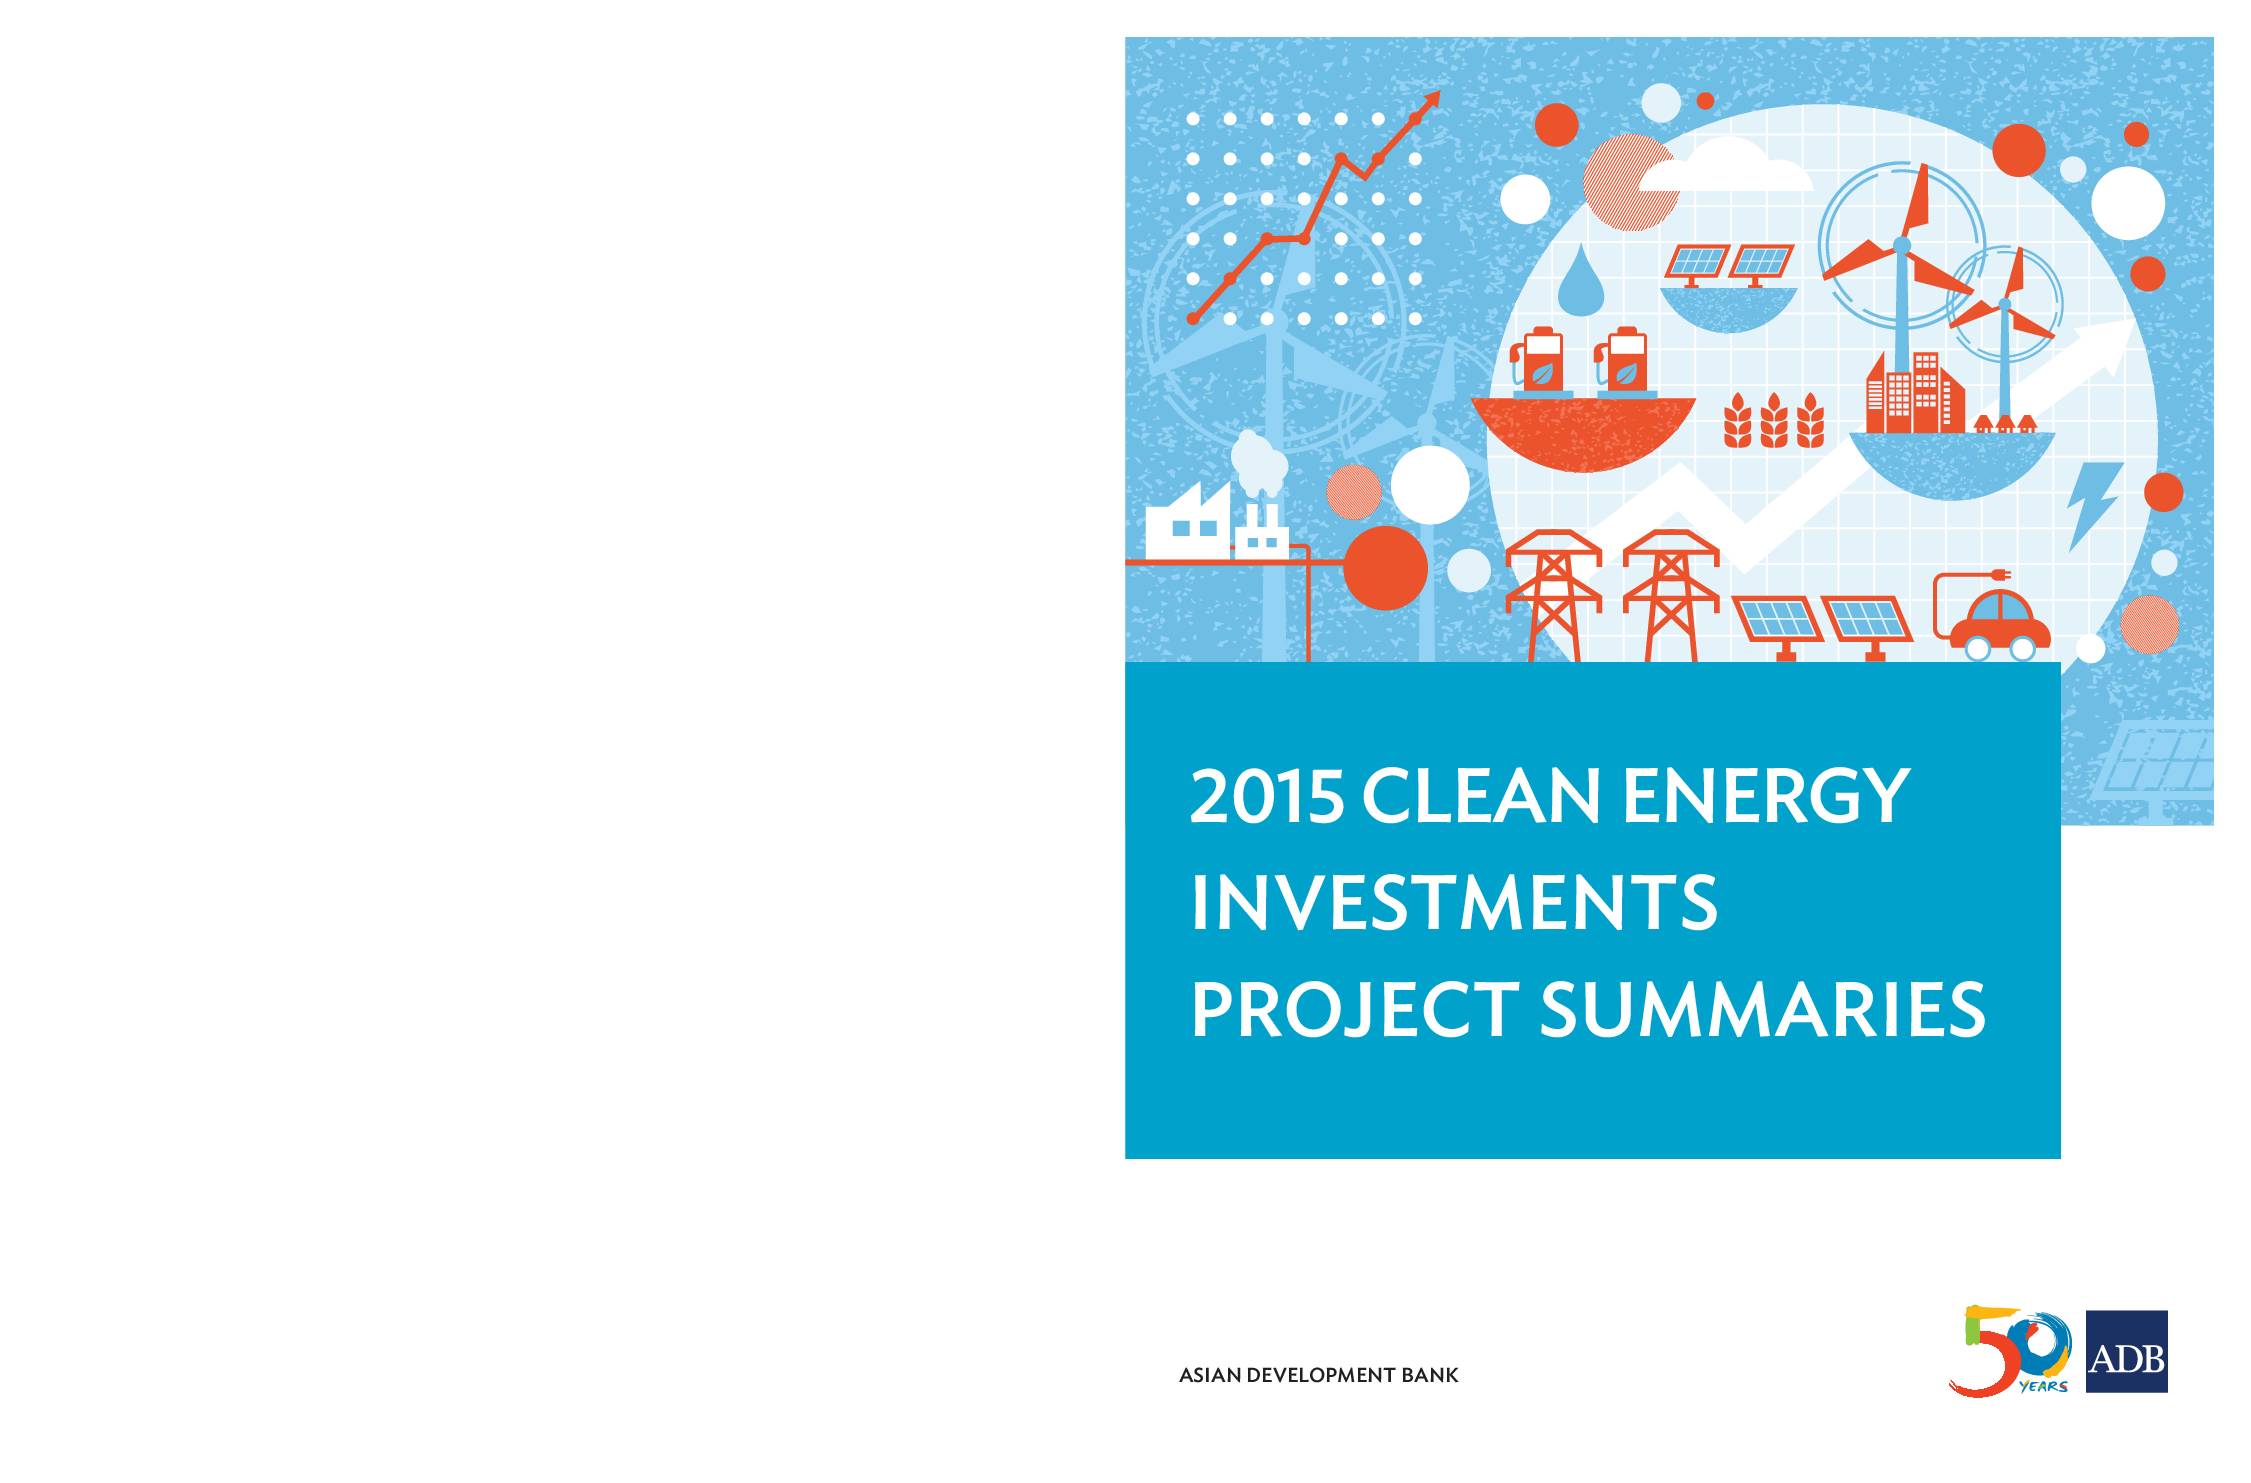 2015 Clean Energy Investments: Project Summaries